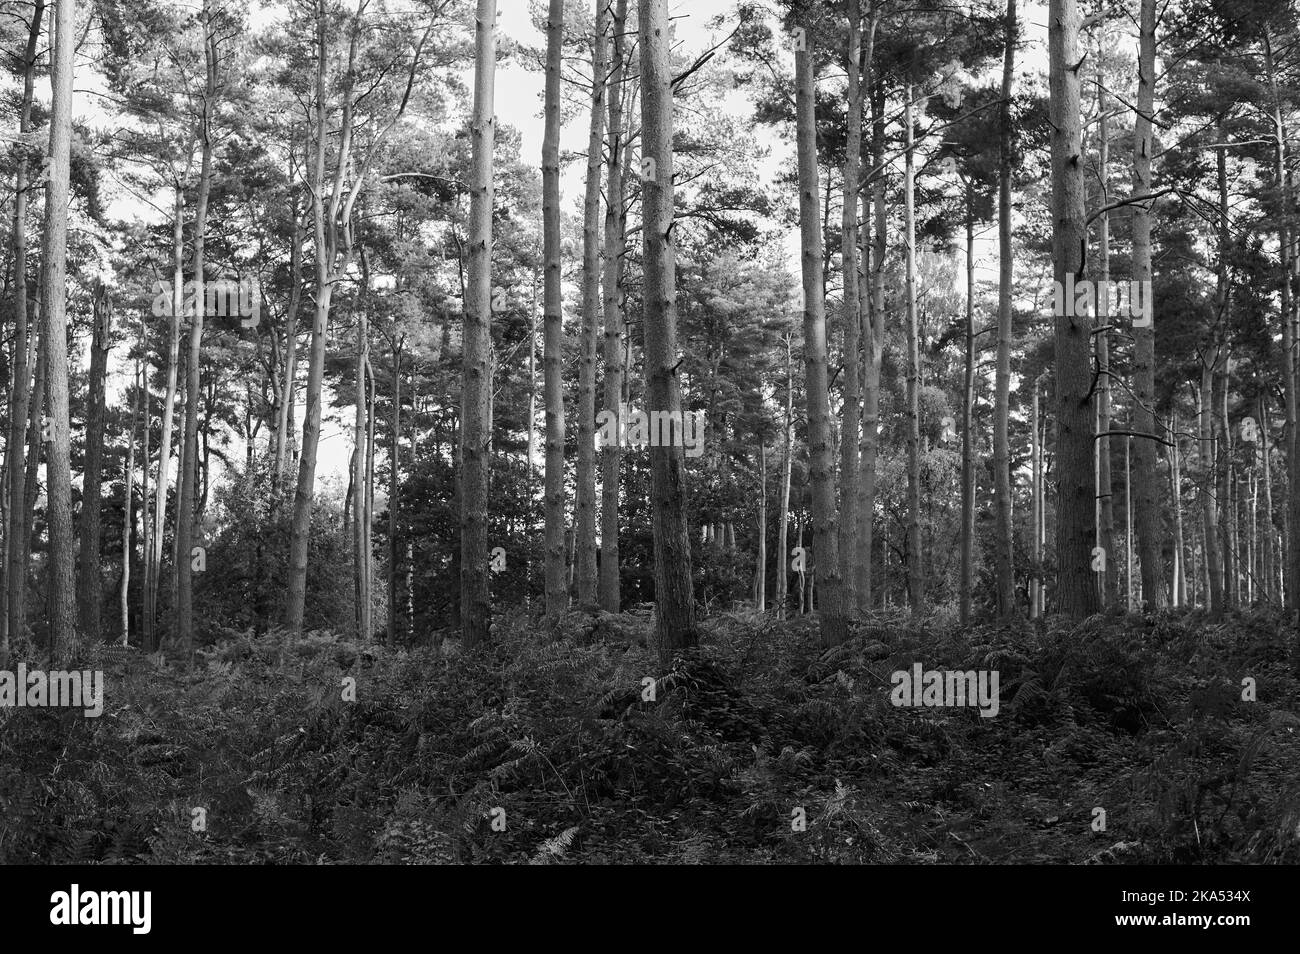 black and white monochrome image of Trees in a forest with green fern and other foliage on ground Stock Photo